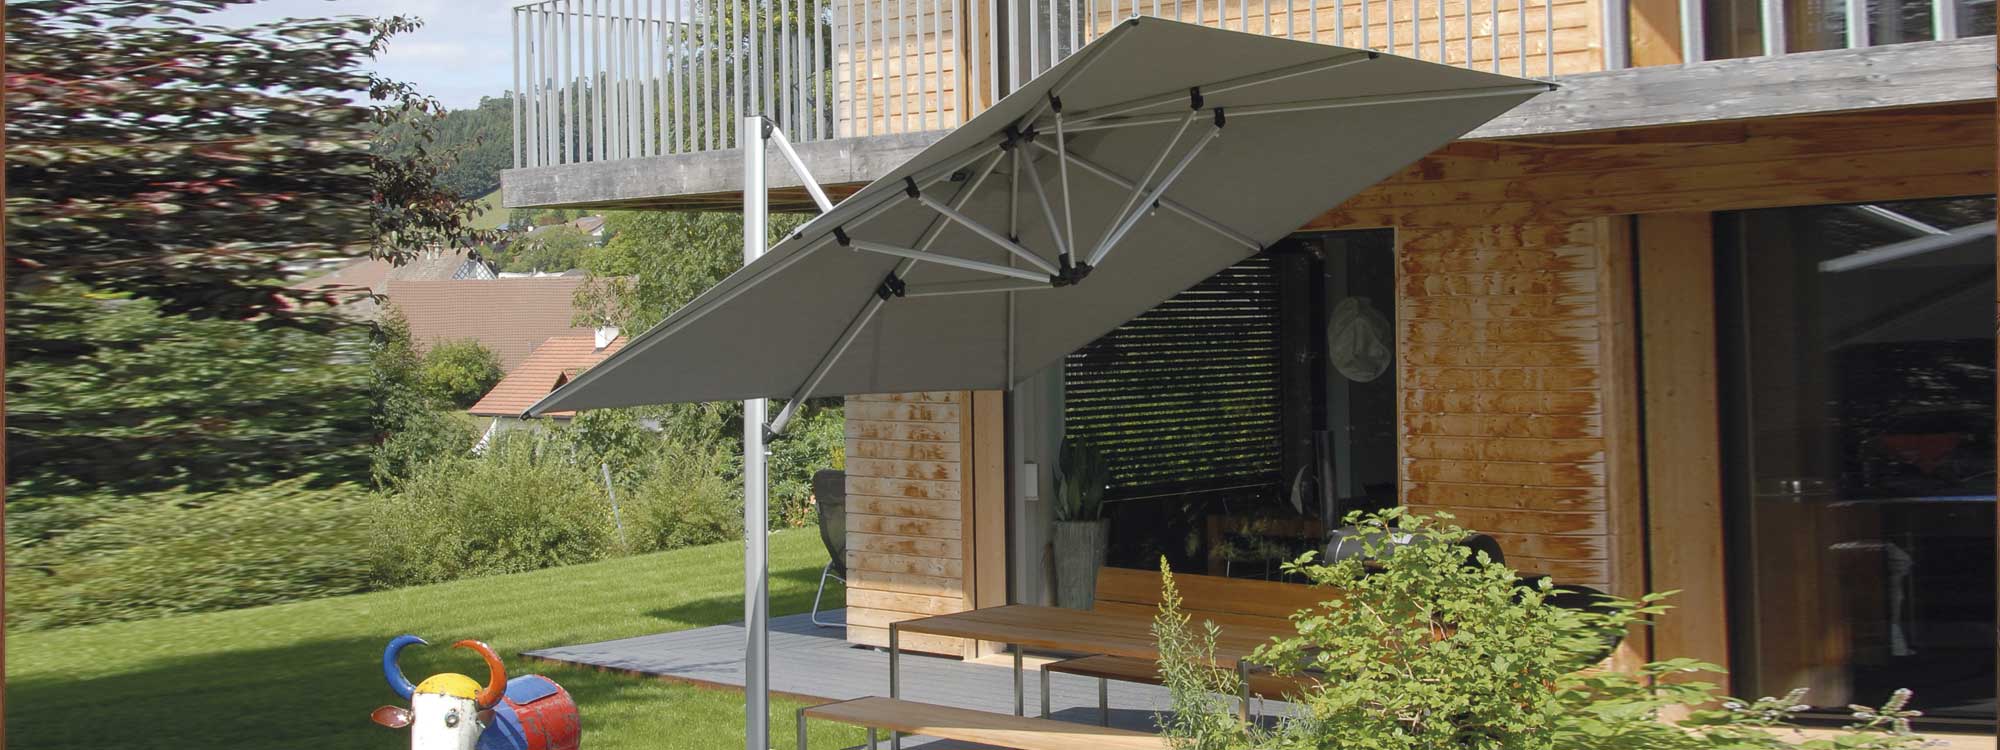 Image of Shademaker Sirius easy to use cantilever parasol on terrace in private back garden